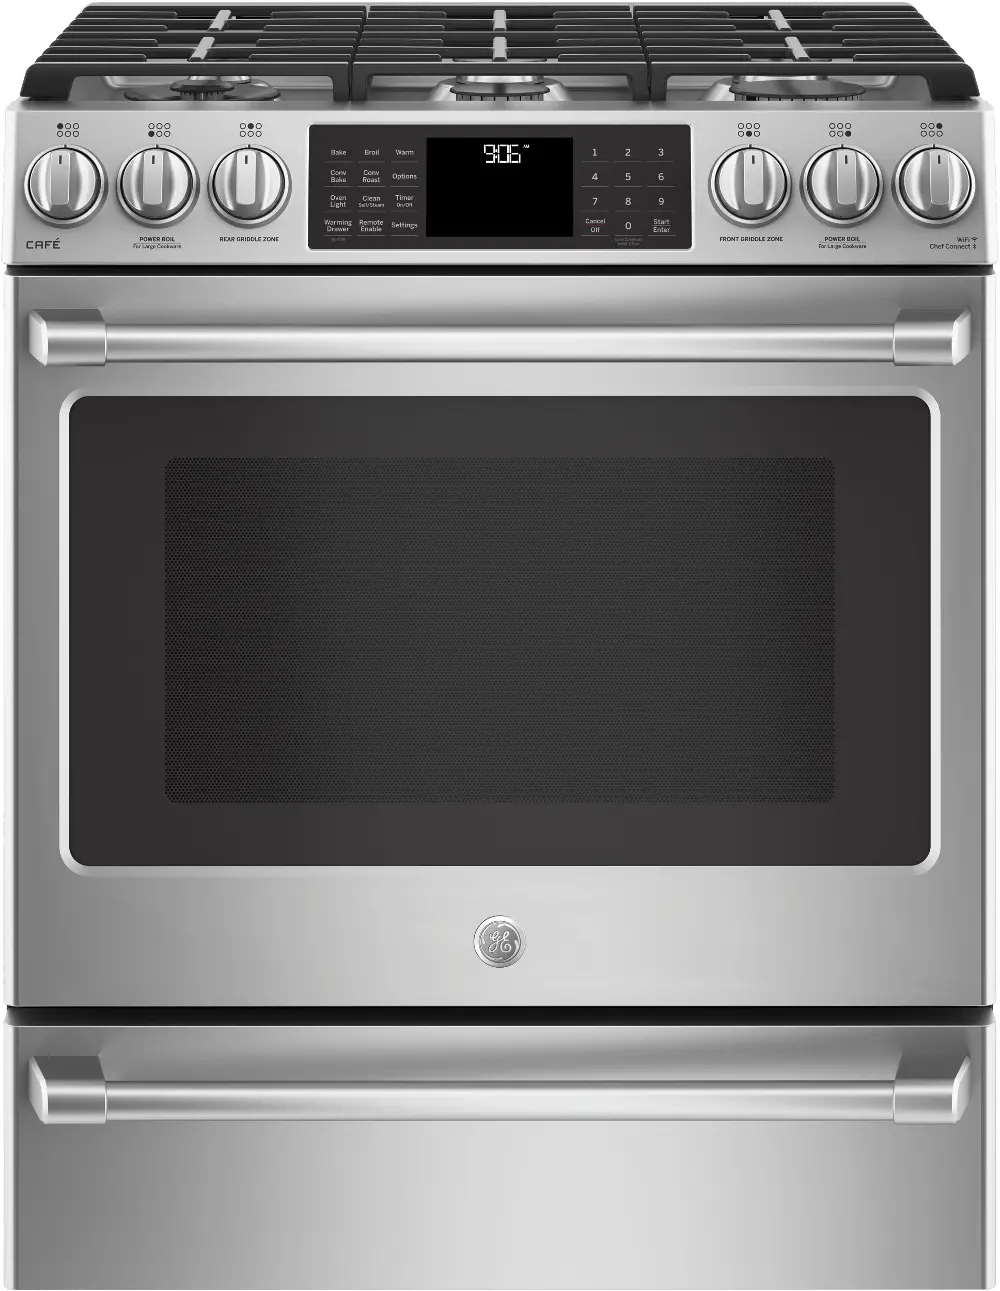 CGS986SELSS Cafe Gas Range - 5.6 cu. ft. Stainless Steel-1